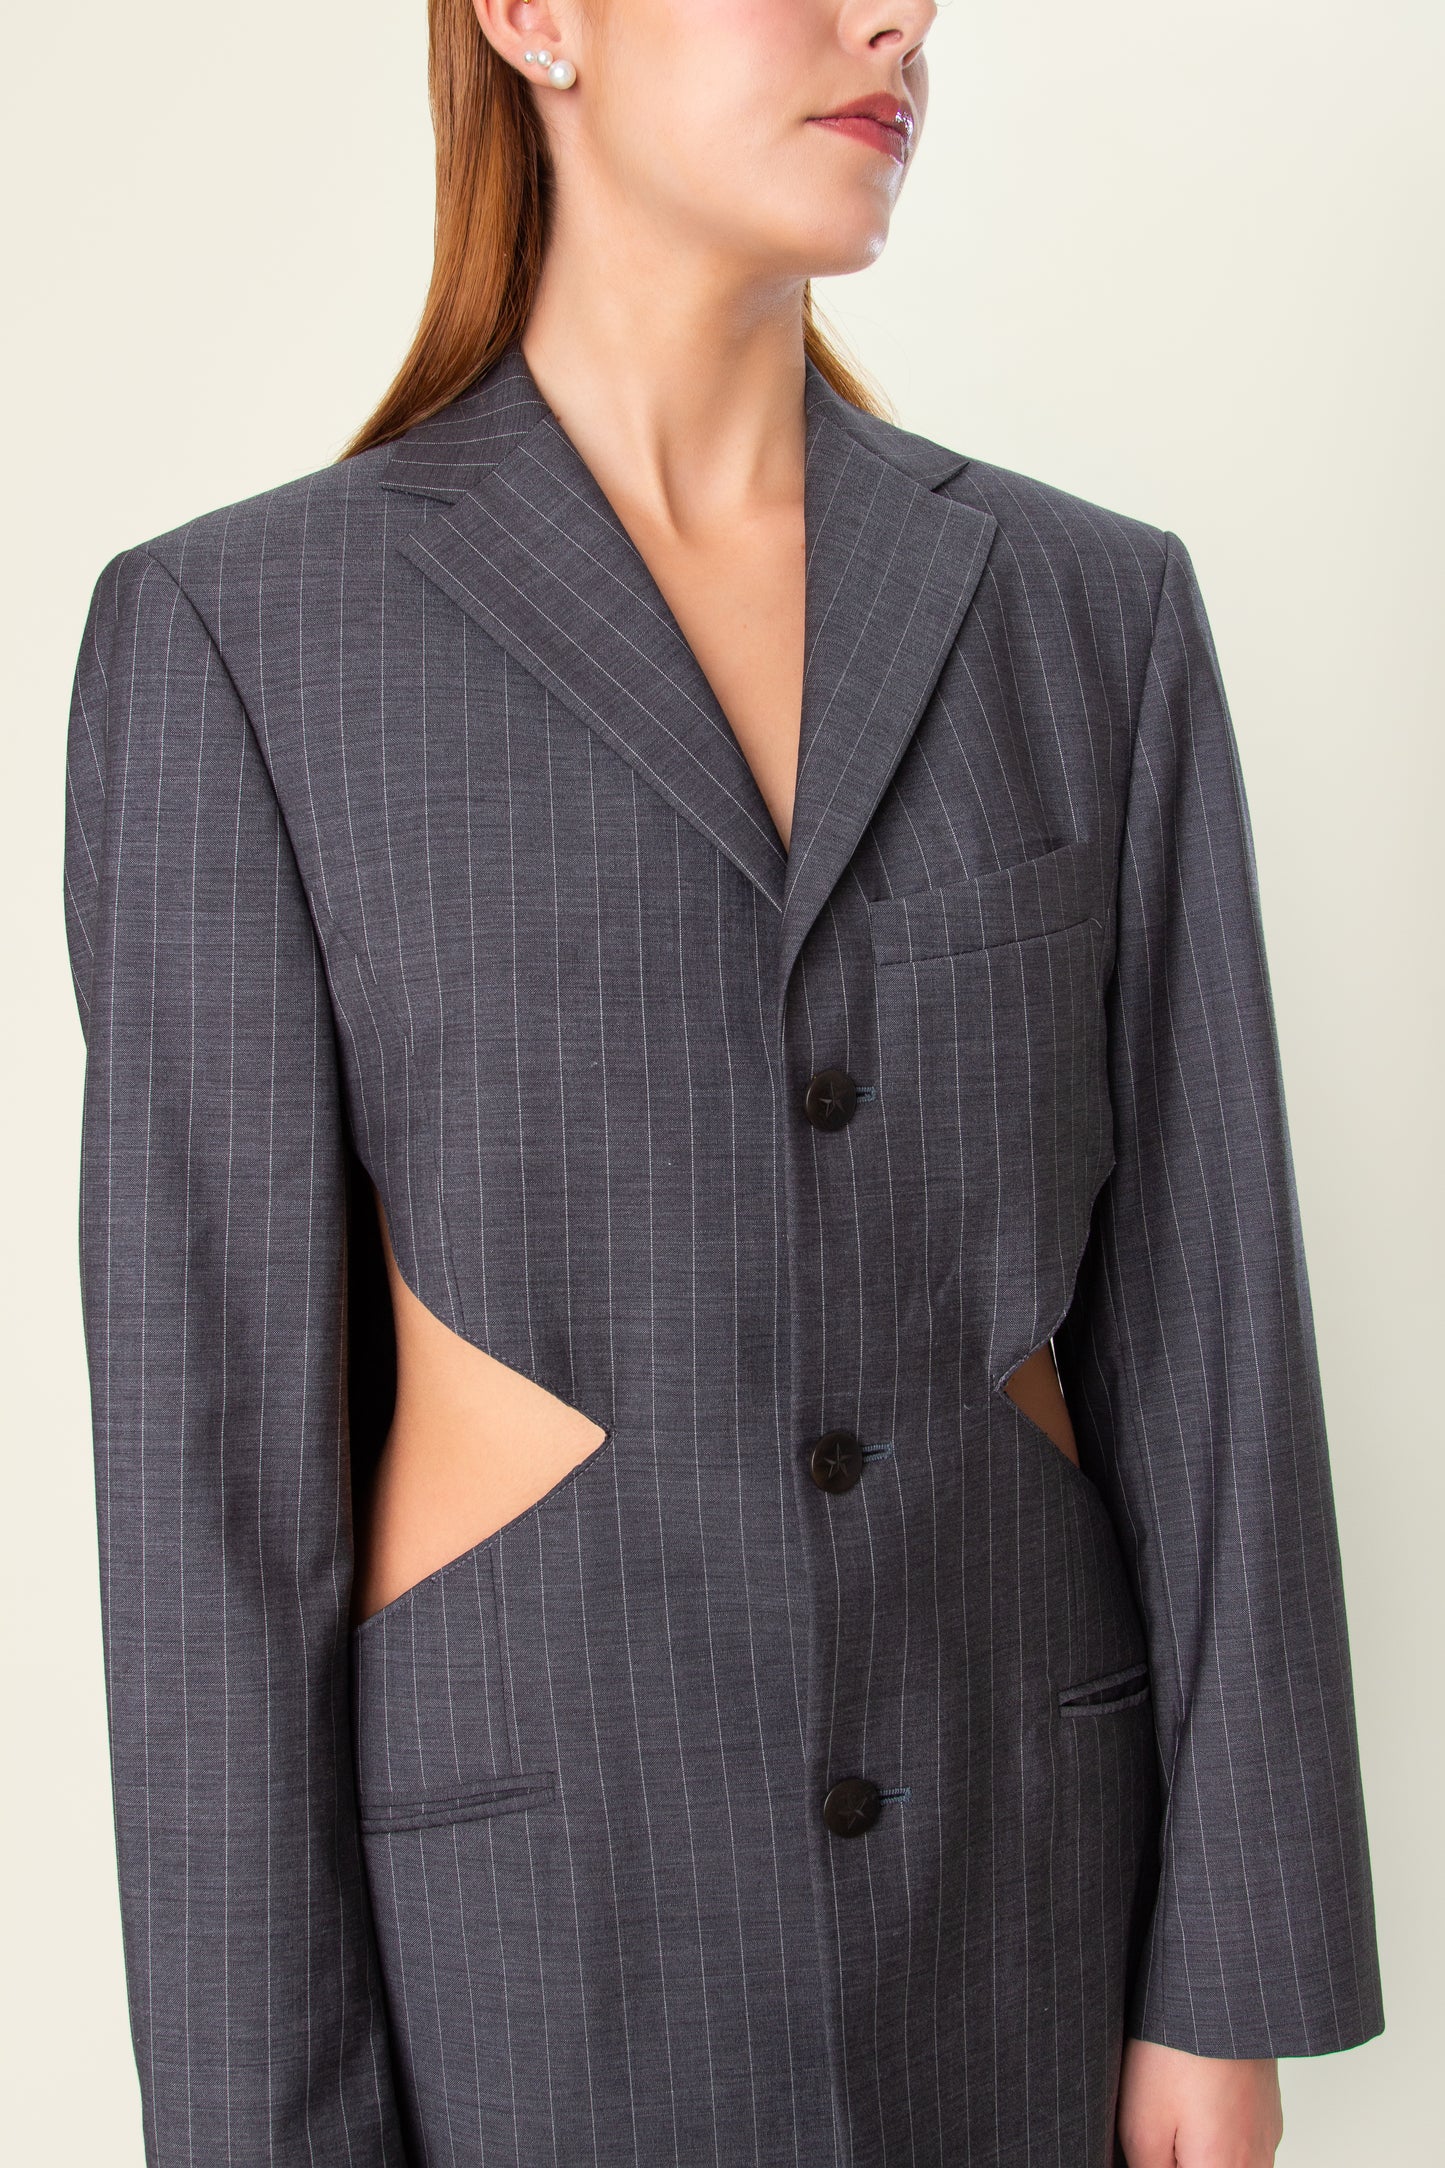 The Cut Out Blazer